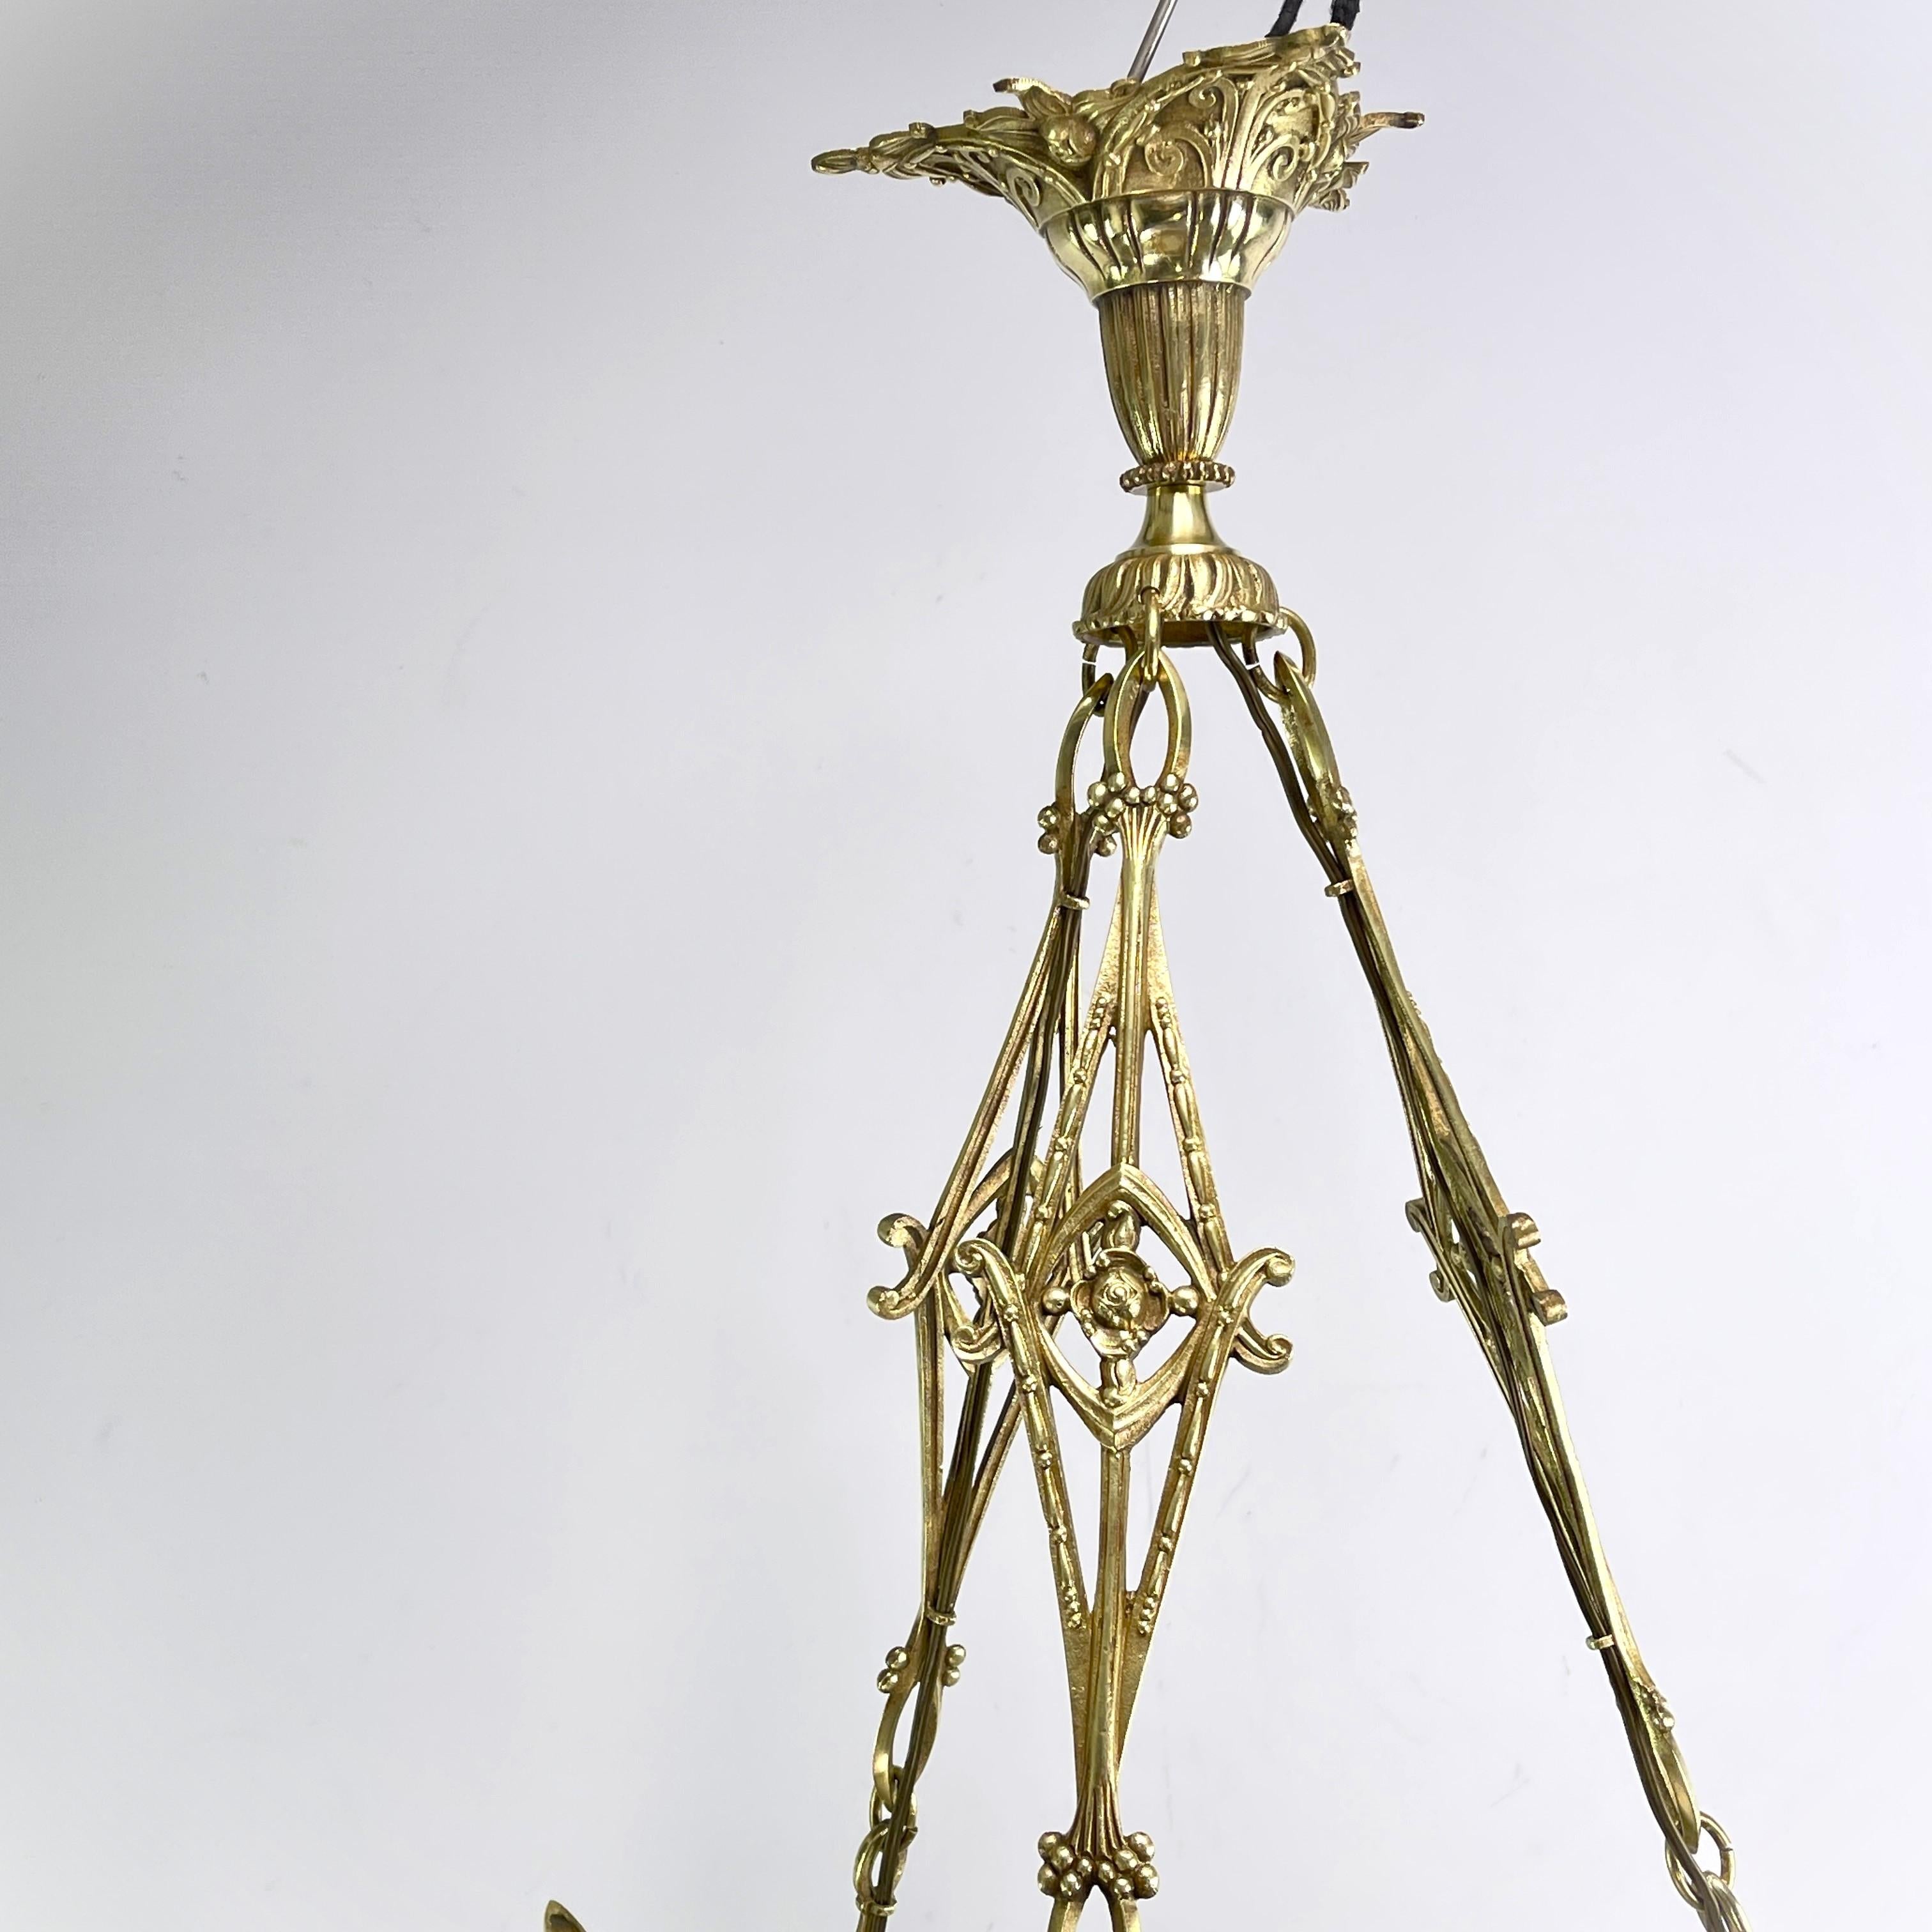 Art-Déco-Kronleuchter by Atelier Petitot & Muller Freres Luneville

This stunning Art Deco chandelier from the 1930s is an outstanding example of the elegance and sophistication of the Art Deco style. With its combination of bronze and glass, this